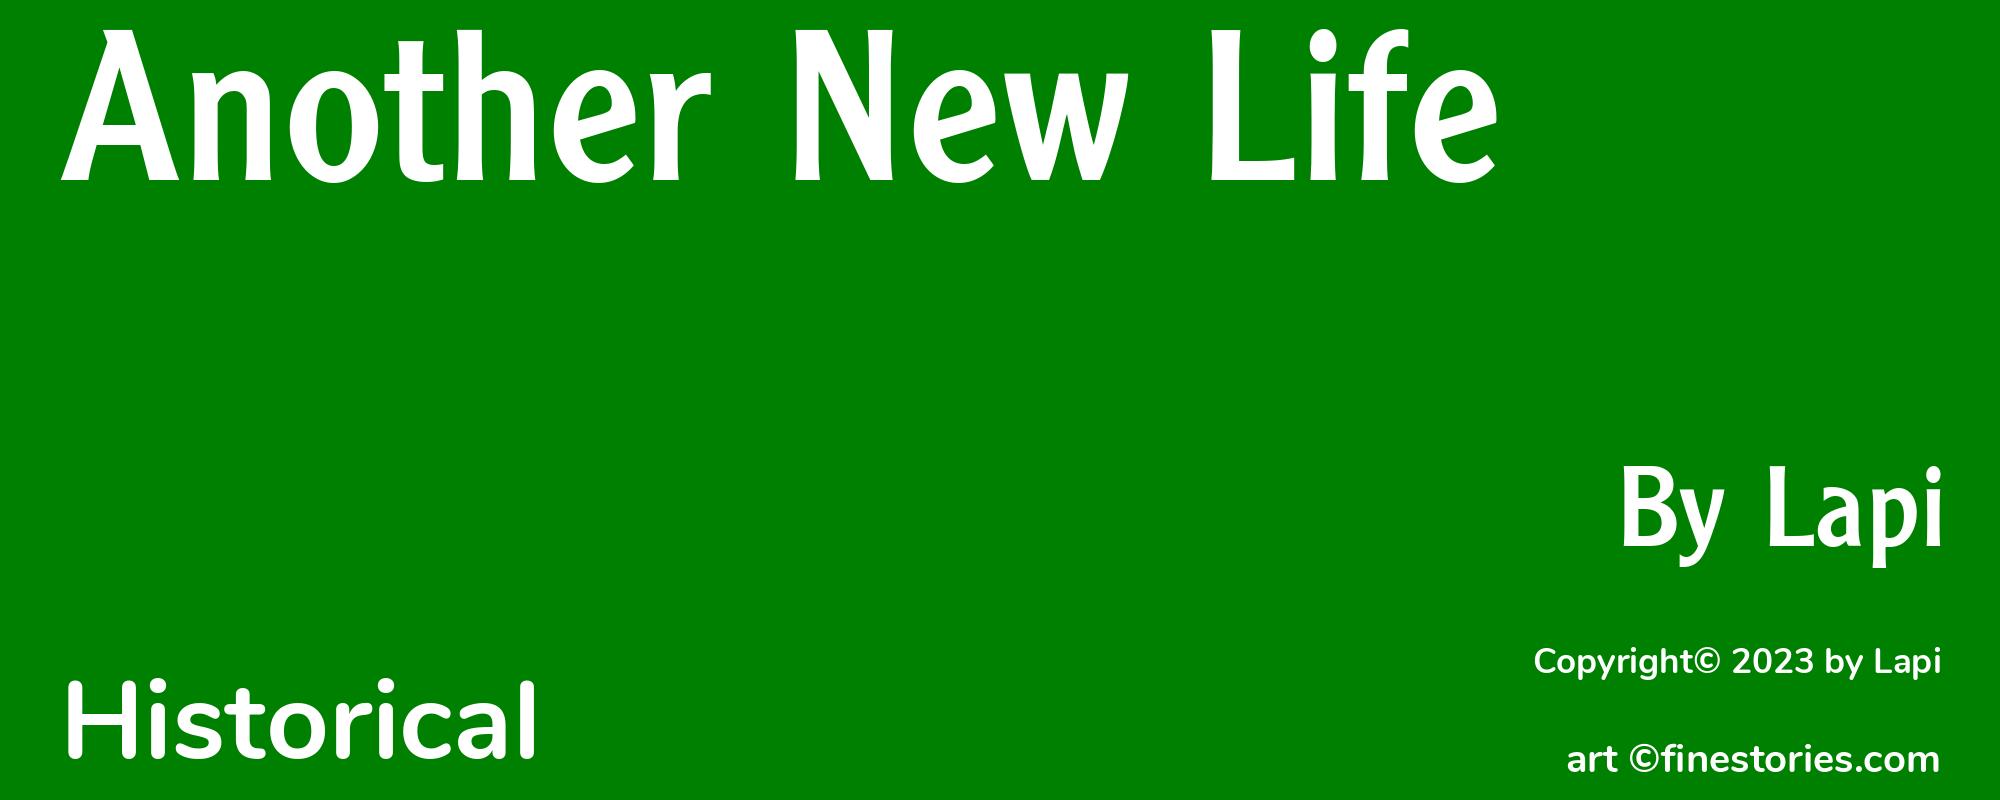 Another New Life - Cover